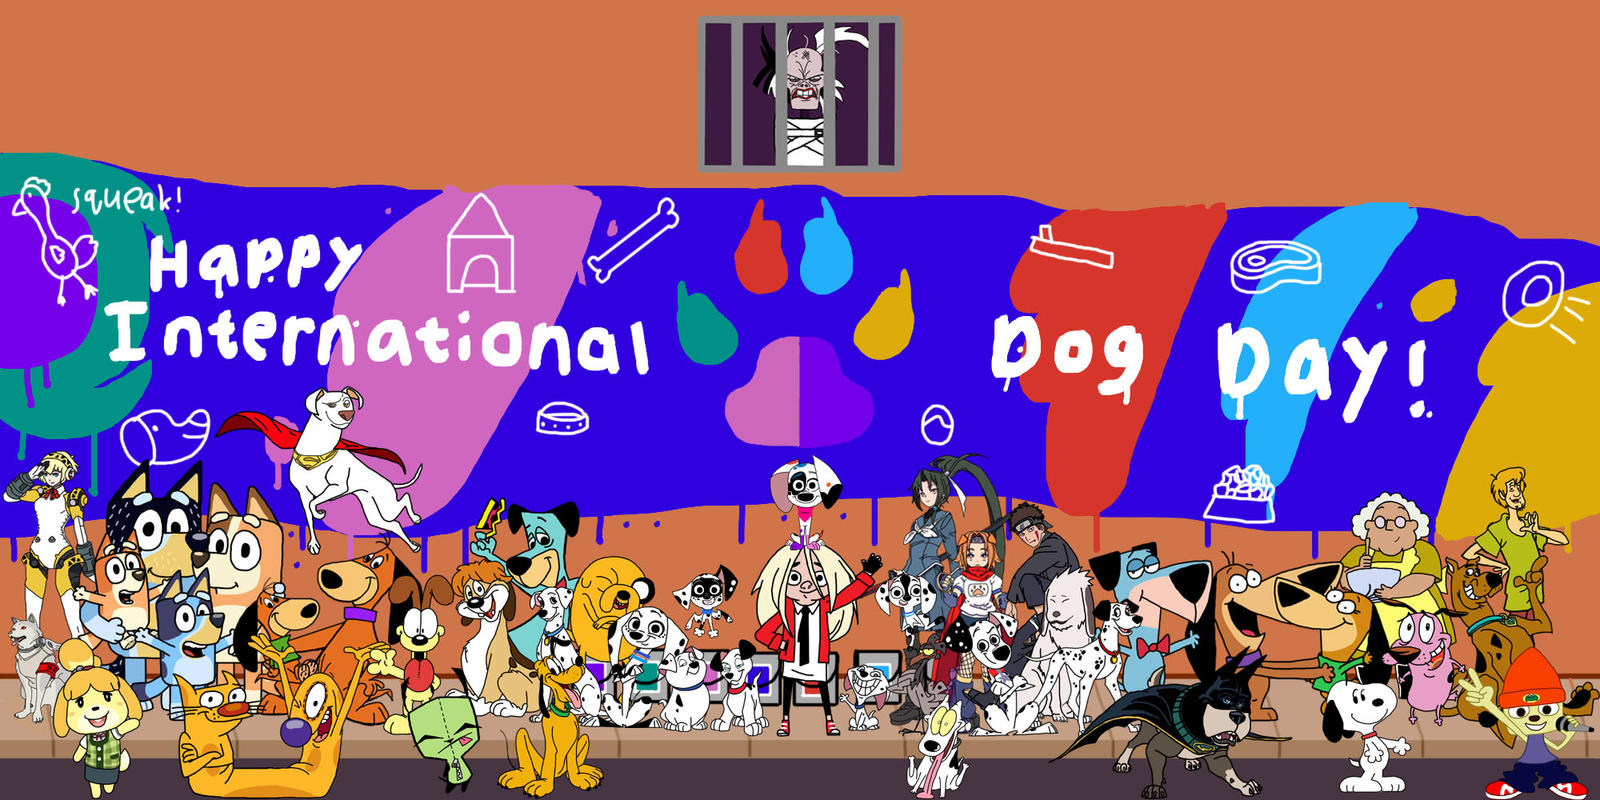 Happy International Dog Day 2022! by Thecookiefish102330 on DeviantArt